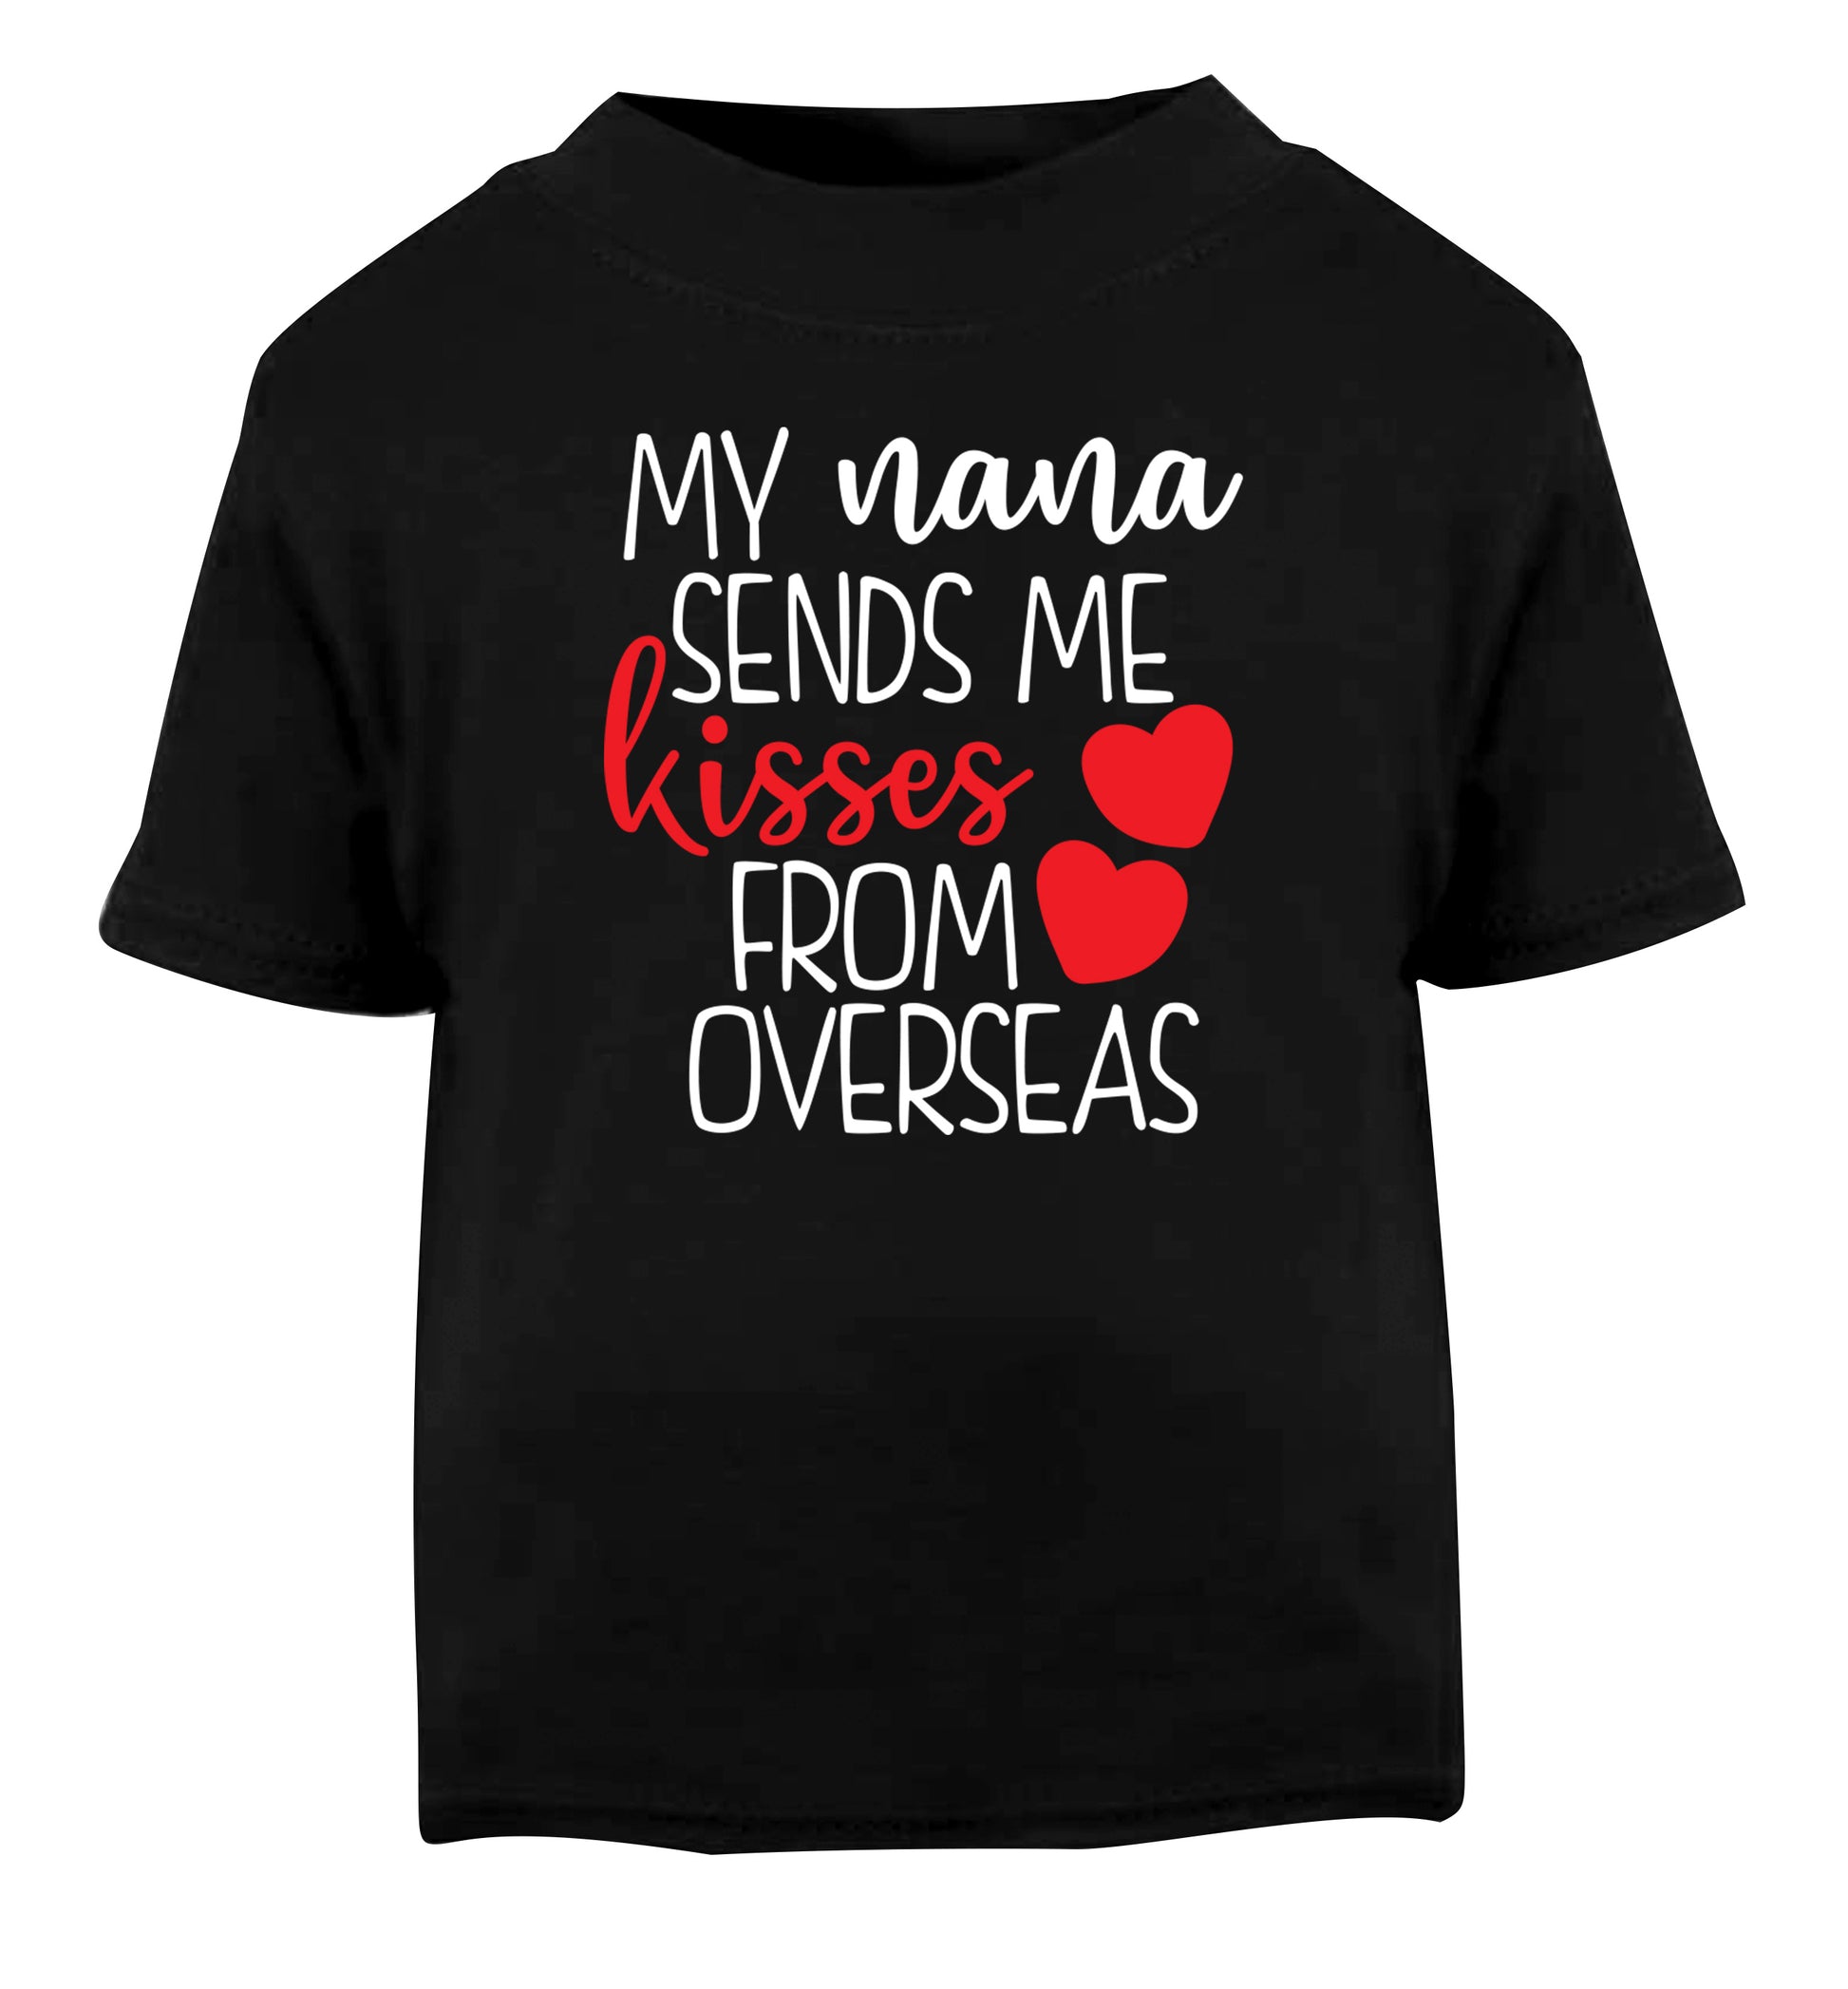 My nana sends me kisses from overseas Black Baby Toddler Tshirt 2 years